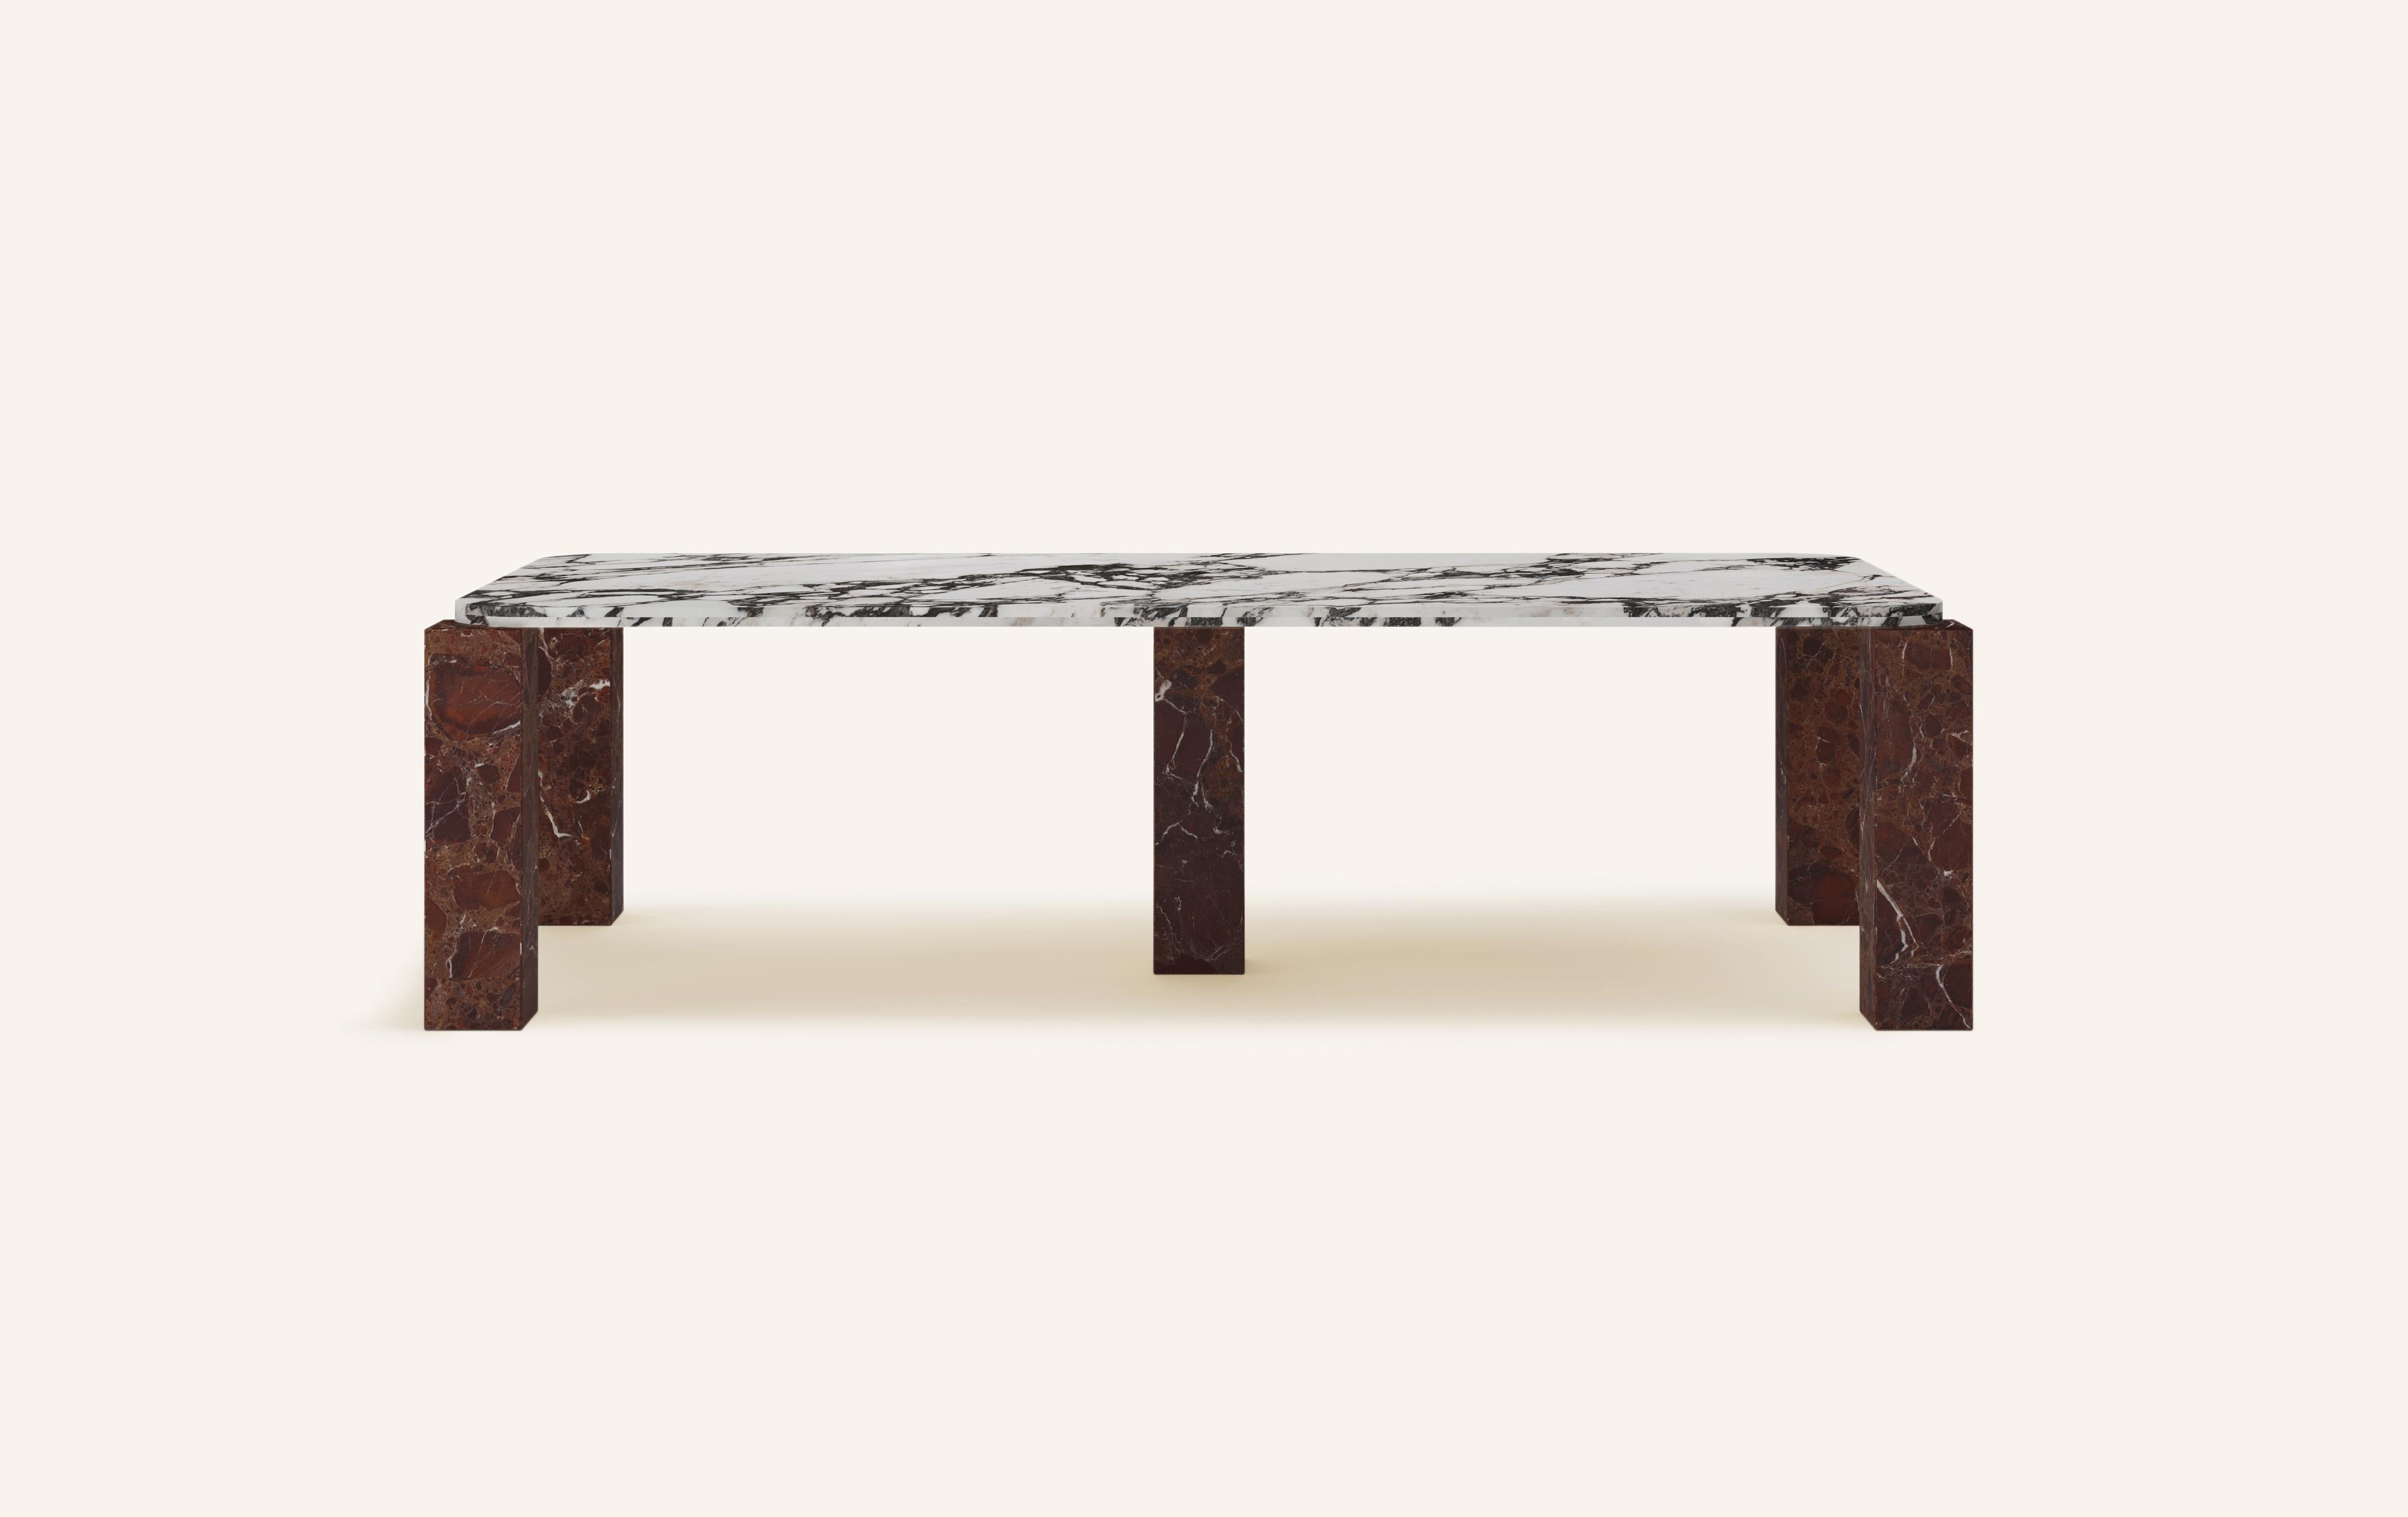 MONOLITHIC FORMS SOFTENED BY GENTLE EDGES. WITH ITS BOLD MARBLE PATTERNS CUBO IS AS VERSATILE AS IT IS STRIKING.

DIMENSIONS:
120”L x 50”W x 30”H: 
- 118”L x 48”W x 1.5” THICK TABLETOP WITH WITH 6